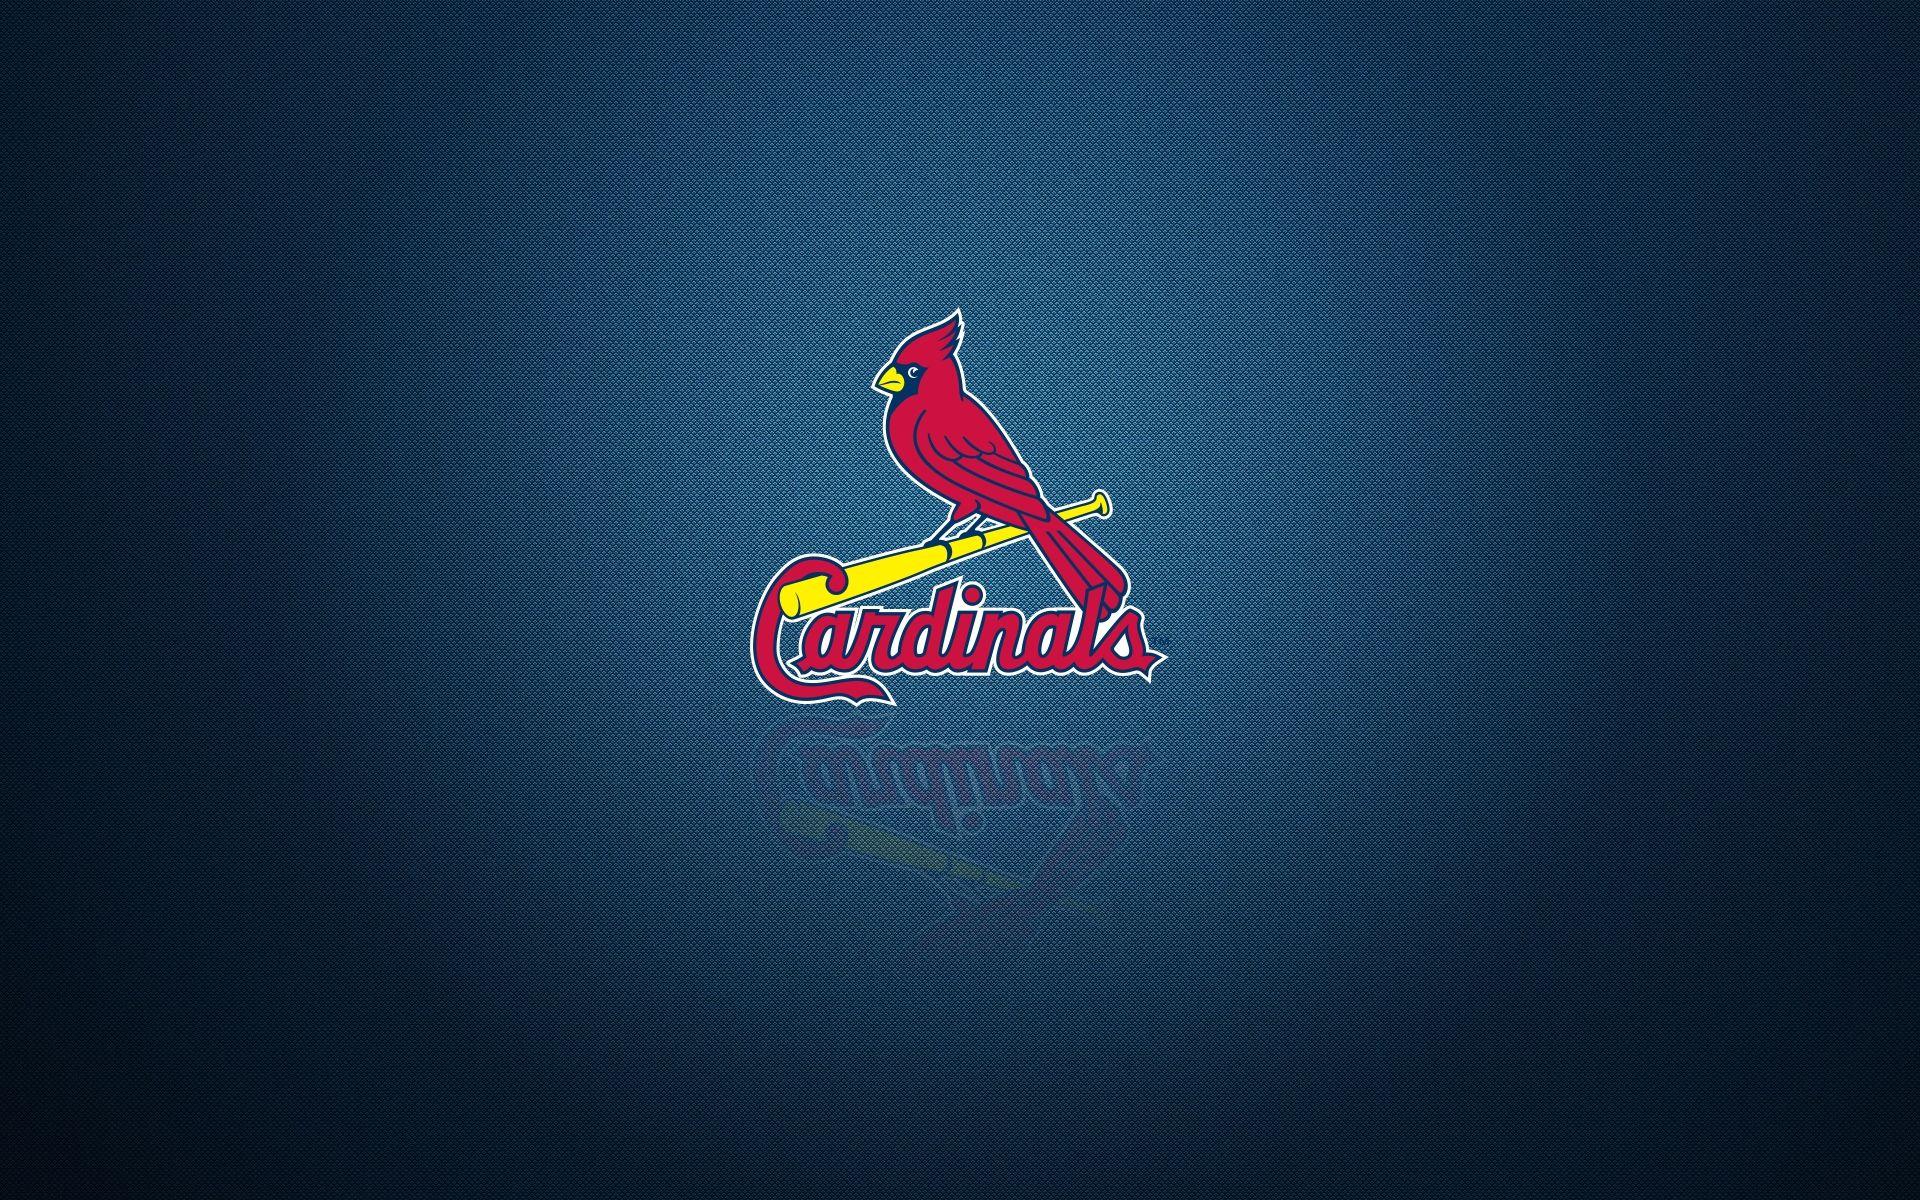 St Louis Cardinals wallpaper by JeremyNeal1 - Download on ZEDGE